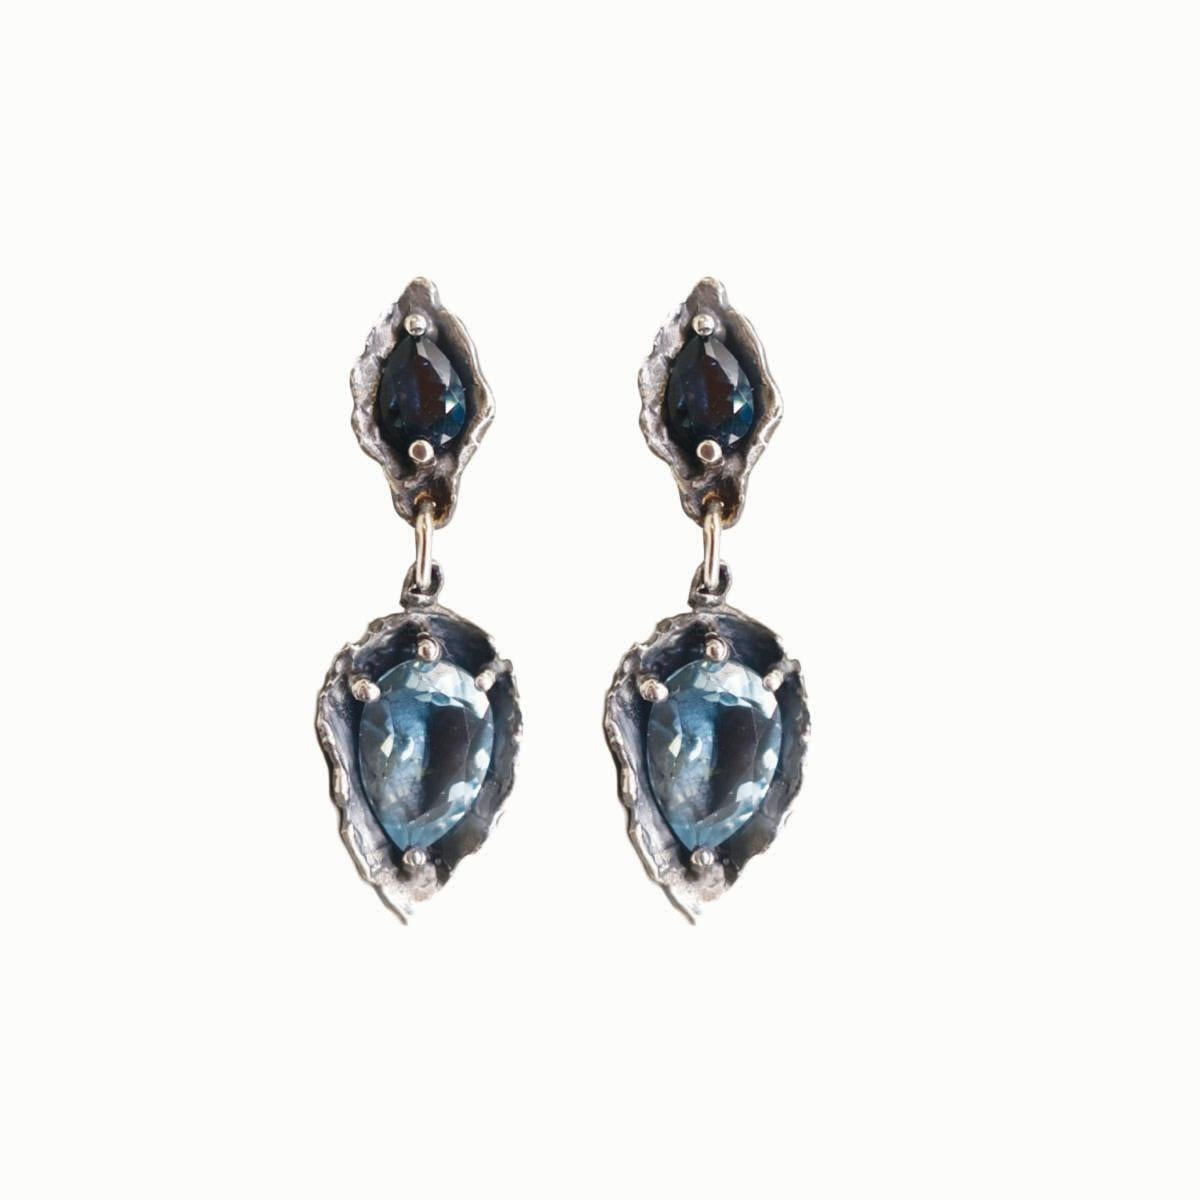 These drop earrings have sterling silver post backs and are solid sterling with London blue topaz and sky blue topaz pears.
These are beautiful statement pieces- They provide beautiful movement as they swing to the movement of your neck. Shown here